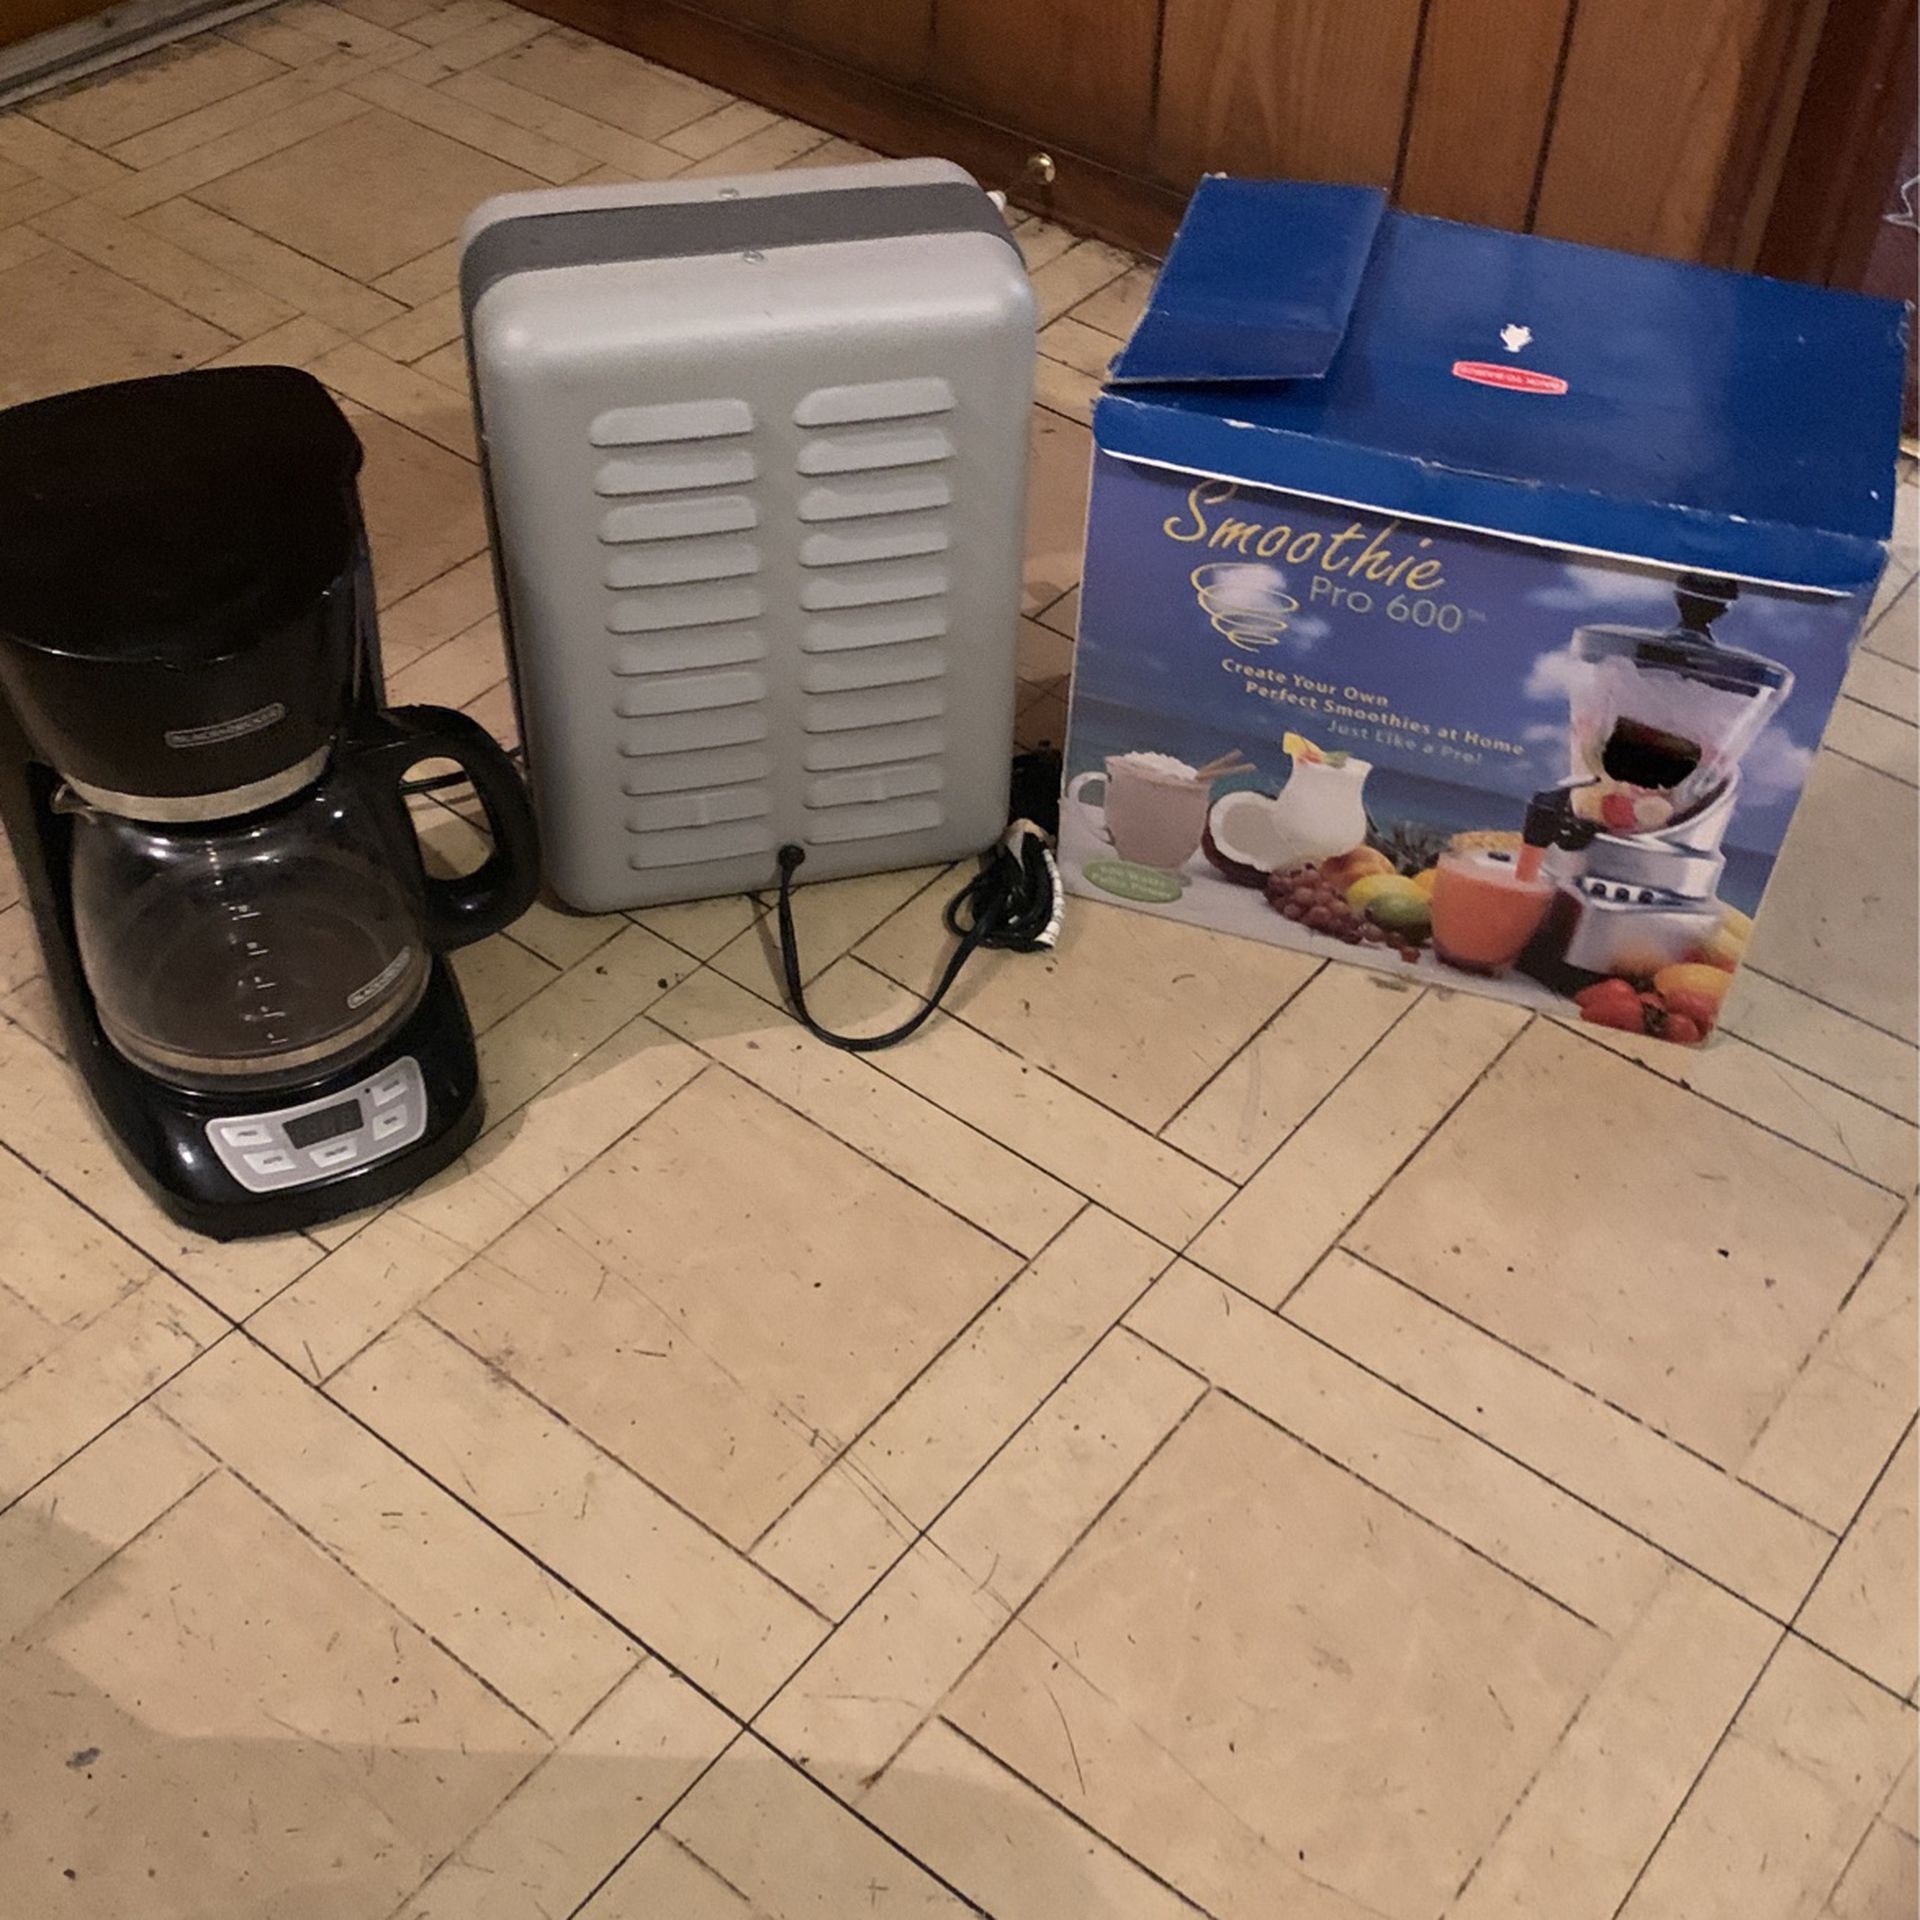 Heater, Coffee Pot, Smoothie Maker